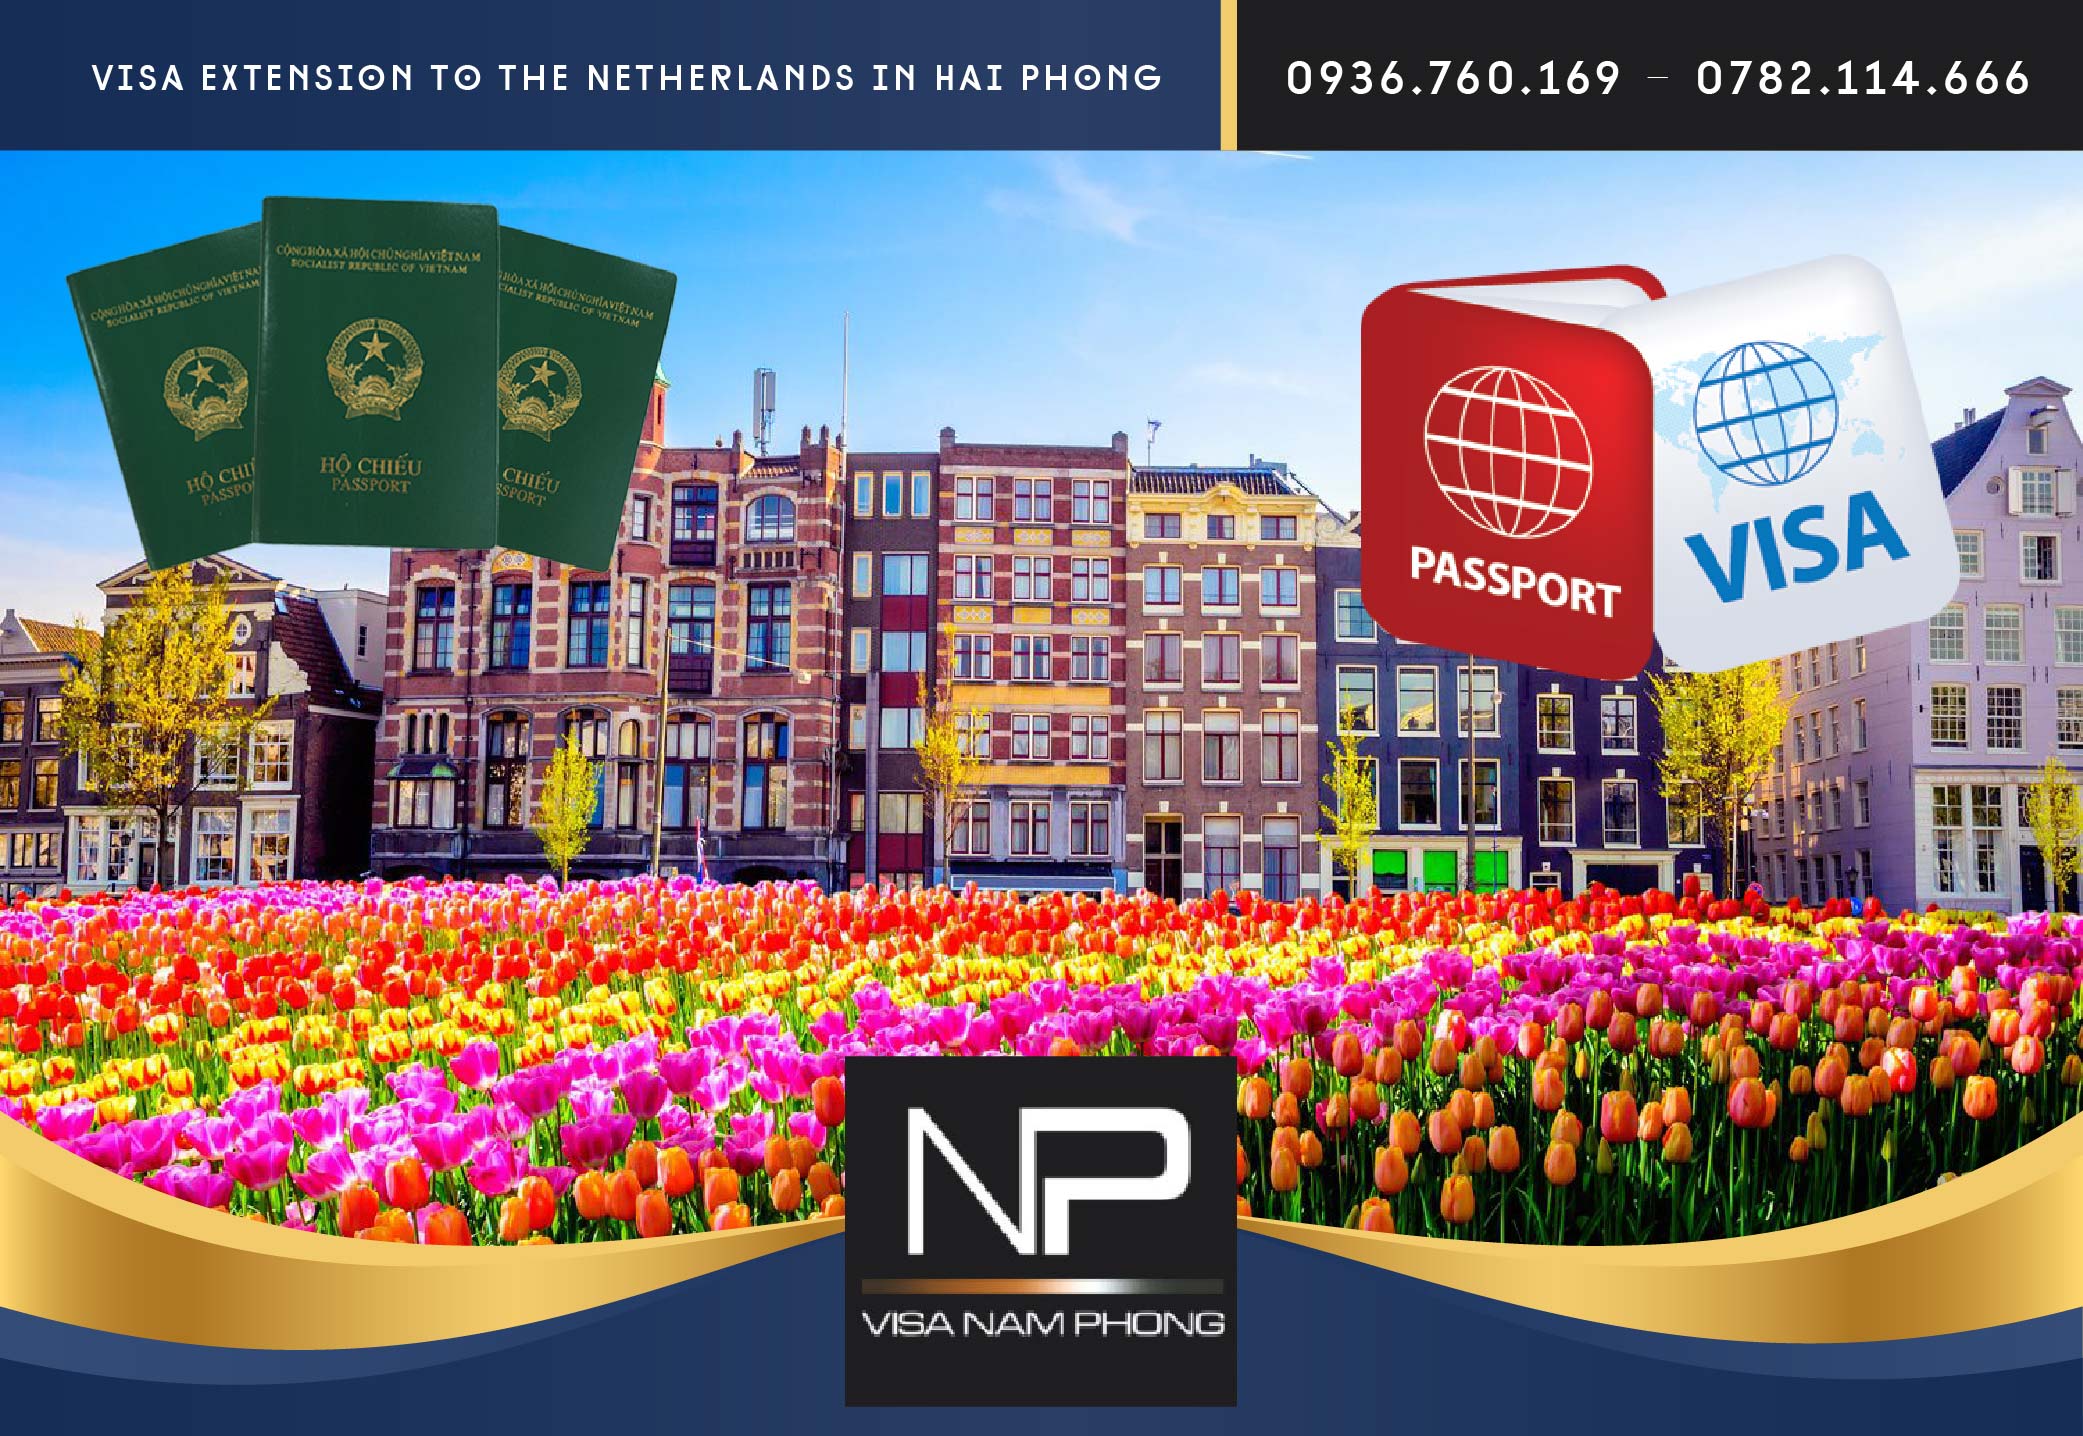 Visa extension to the Netherlands in Hai Phong